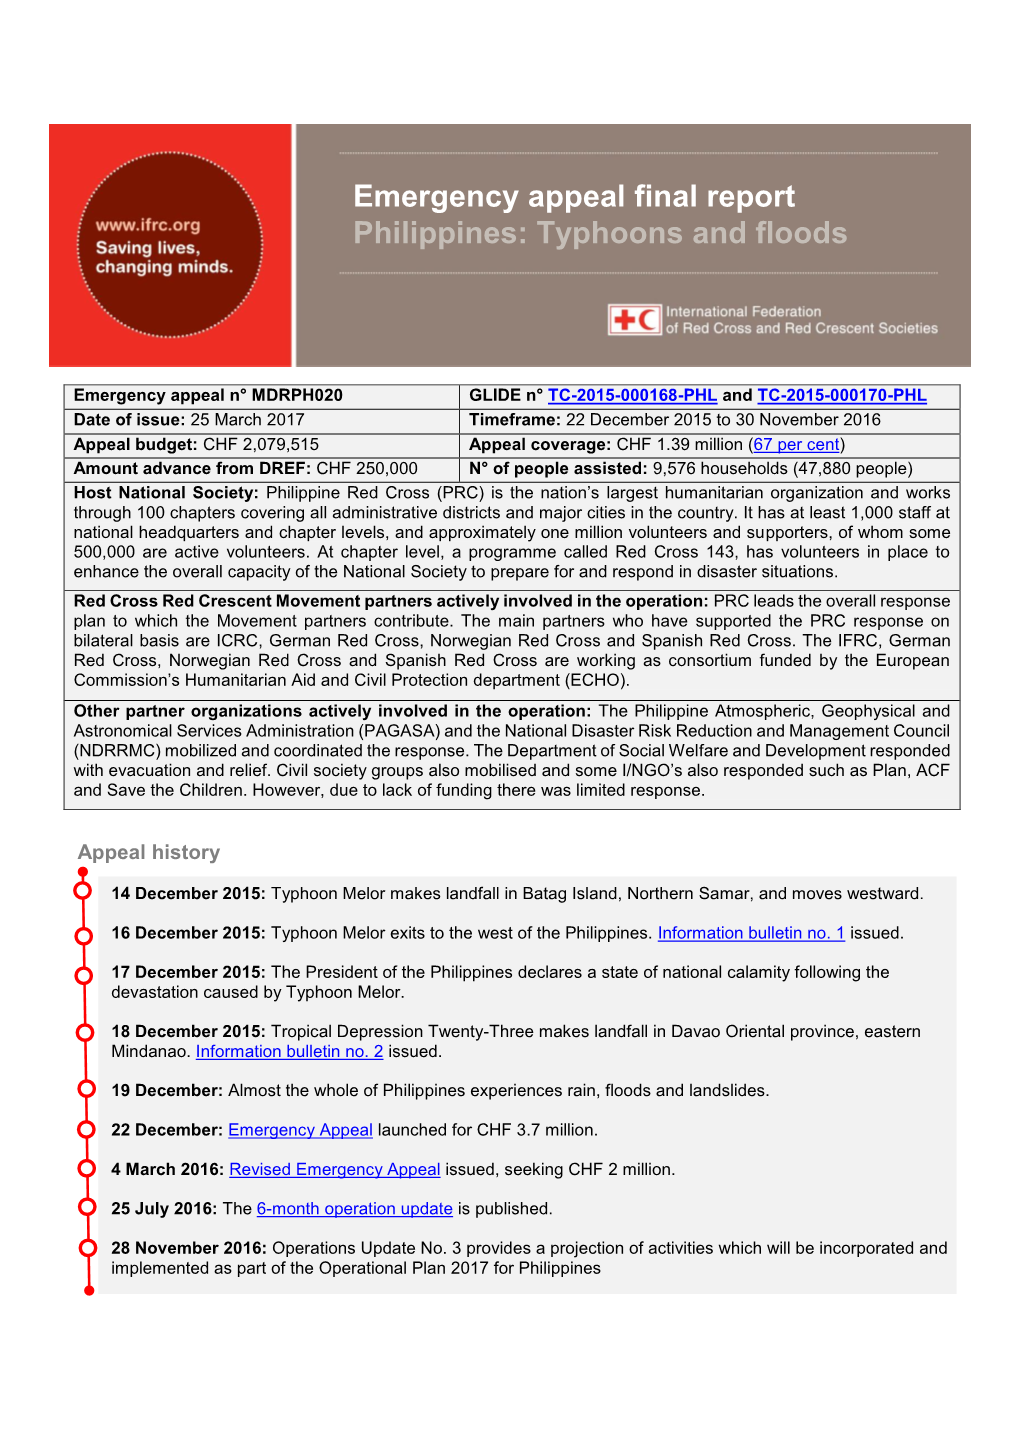 Emergency Appeal Final Report Philippines: Typhoons and Floods